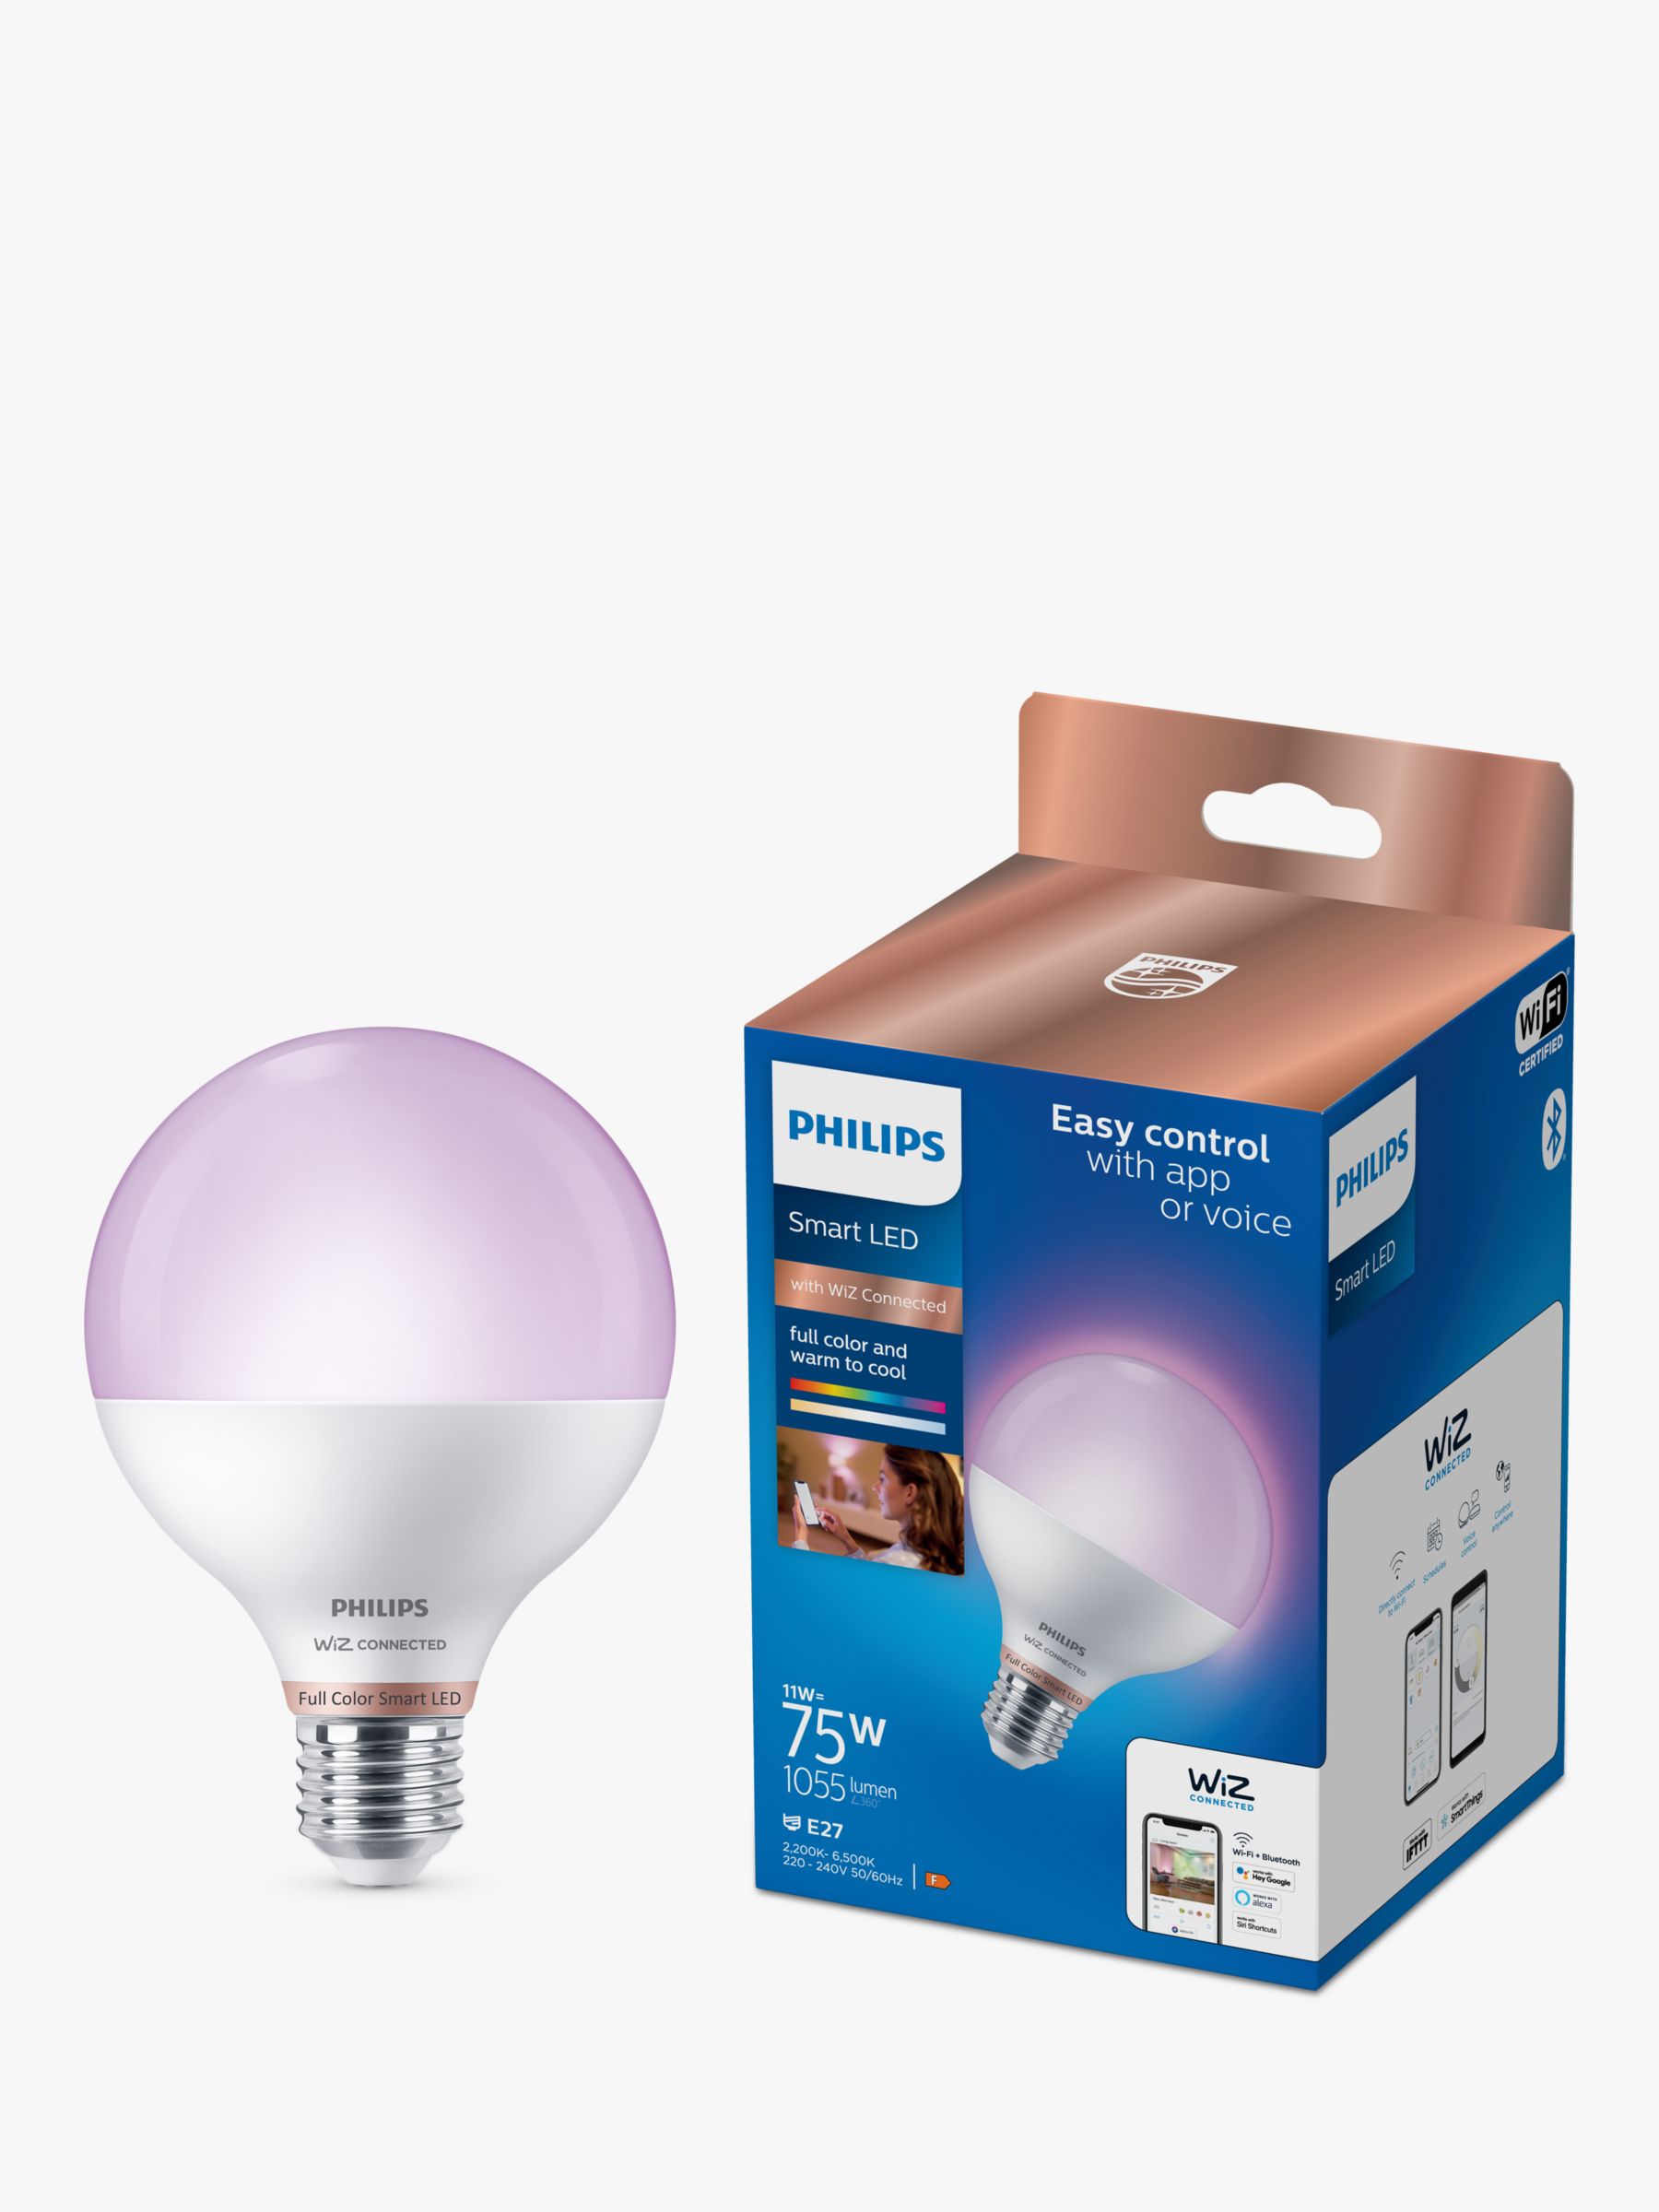 afgår ved godt London Philips Smart LED 11W G95 E27 Dimmable Full Colour and Warm-to-Cool Globe  Bulb with WiZ Connected and Bluetooth, Clear